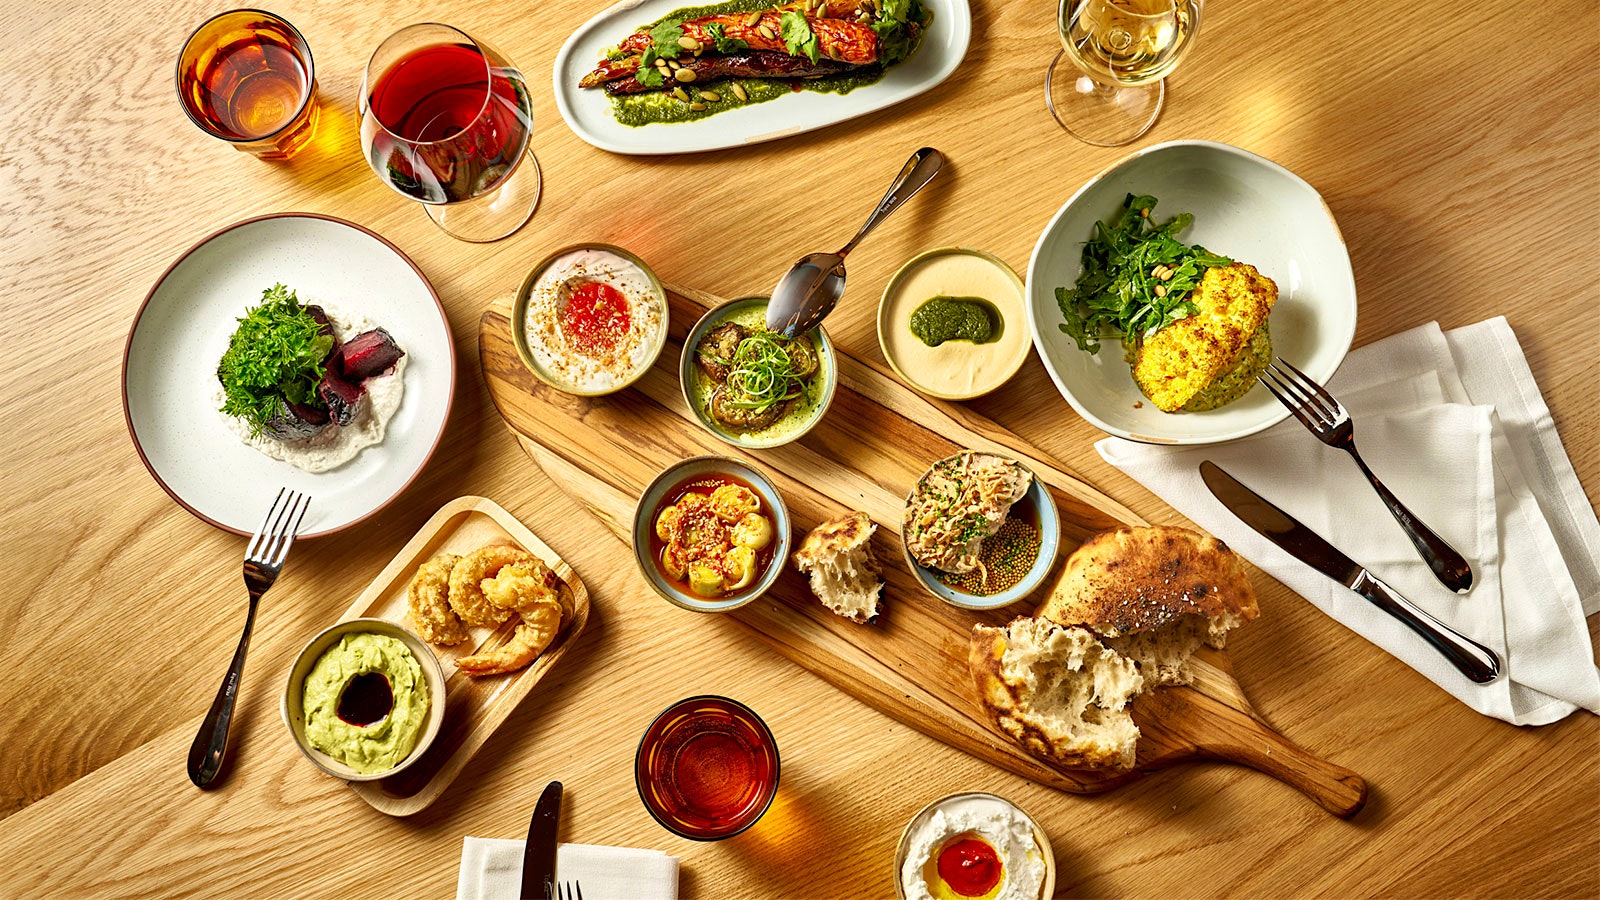  Different Israeli mezze dishes with glasses of wine.